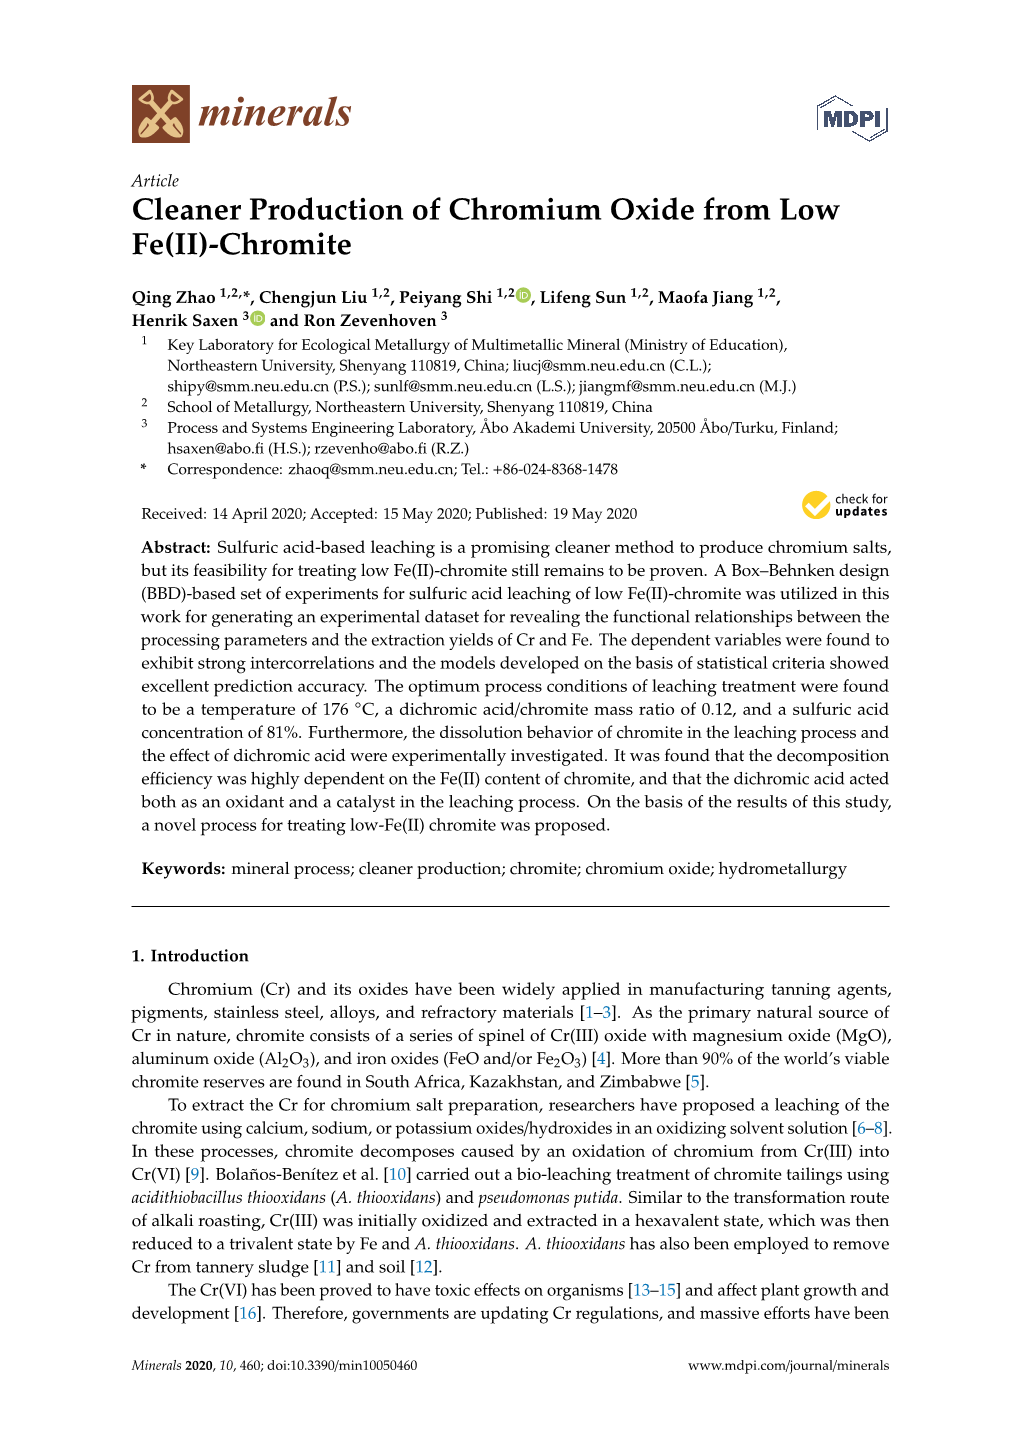 Cleaner Production of Chromium Oxide from Low Fe(II)-Chromite